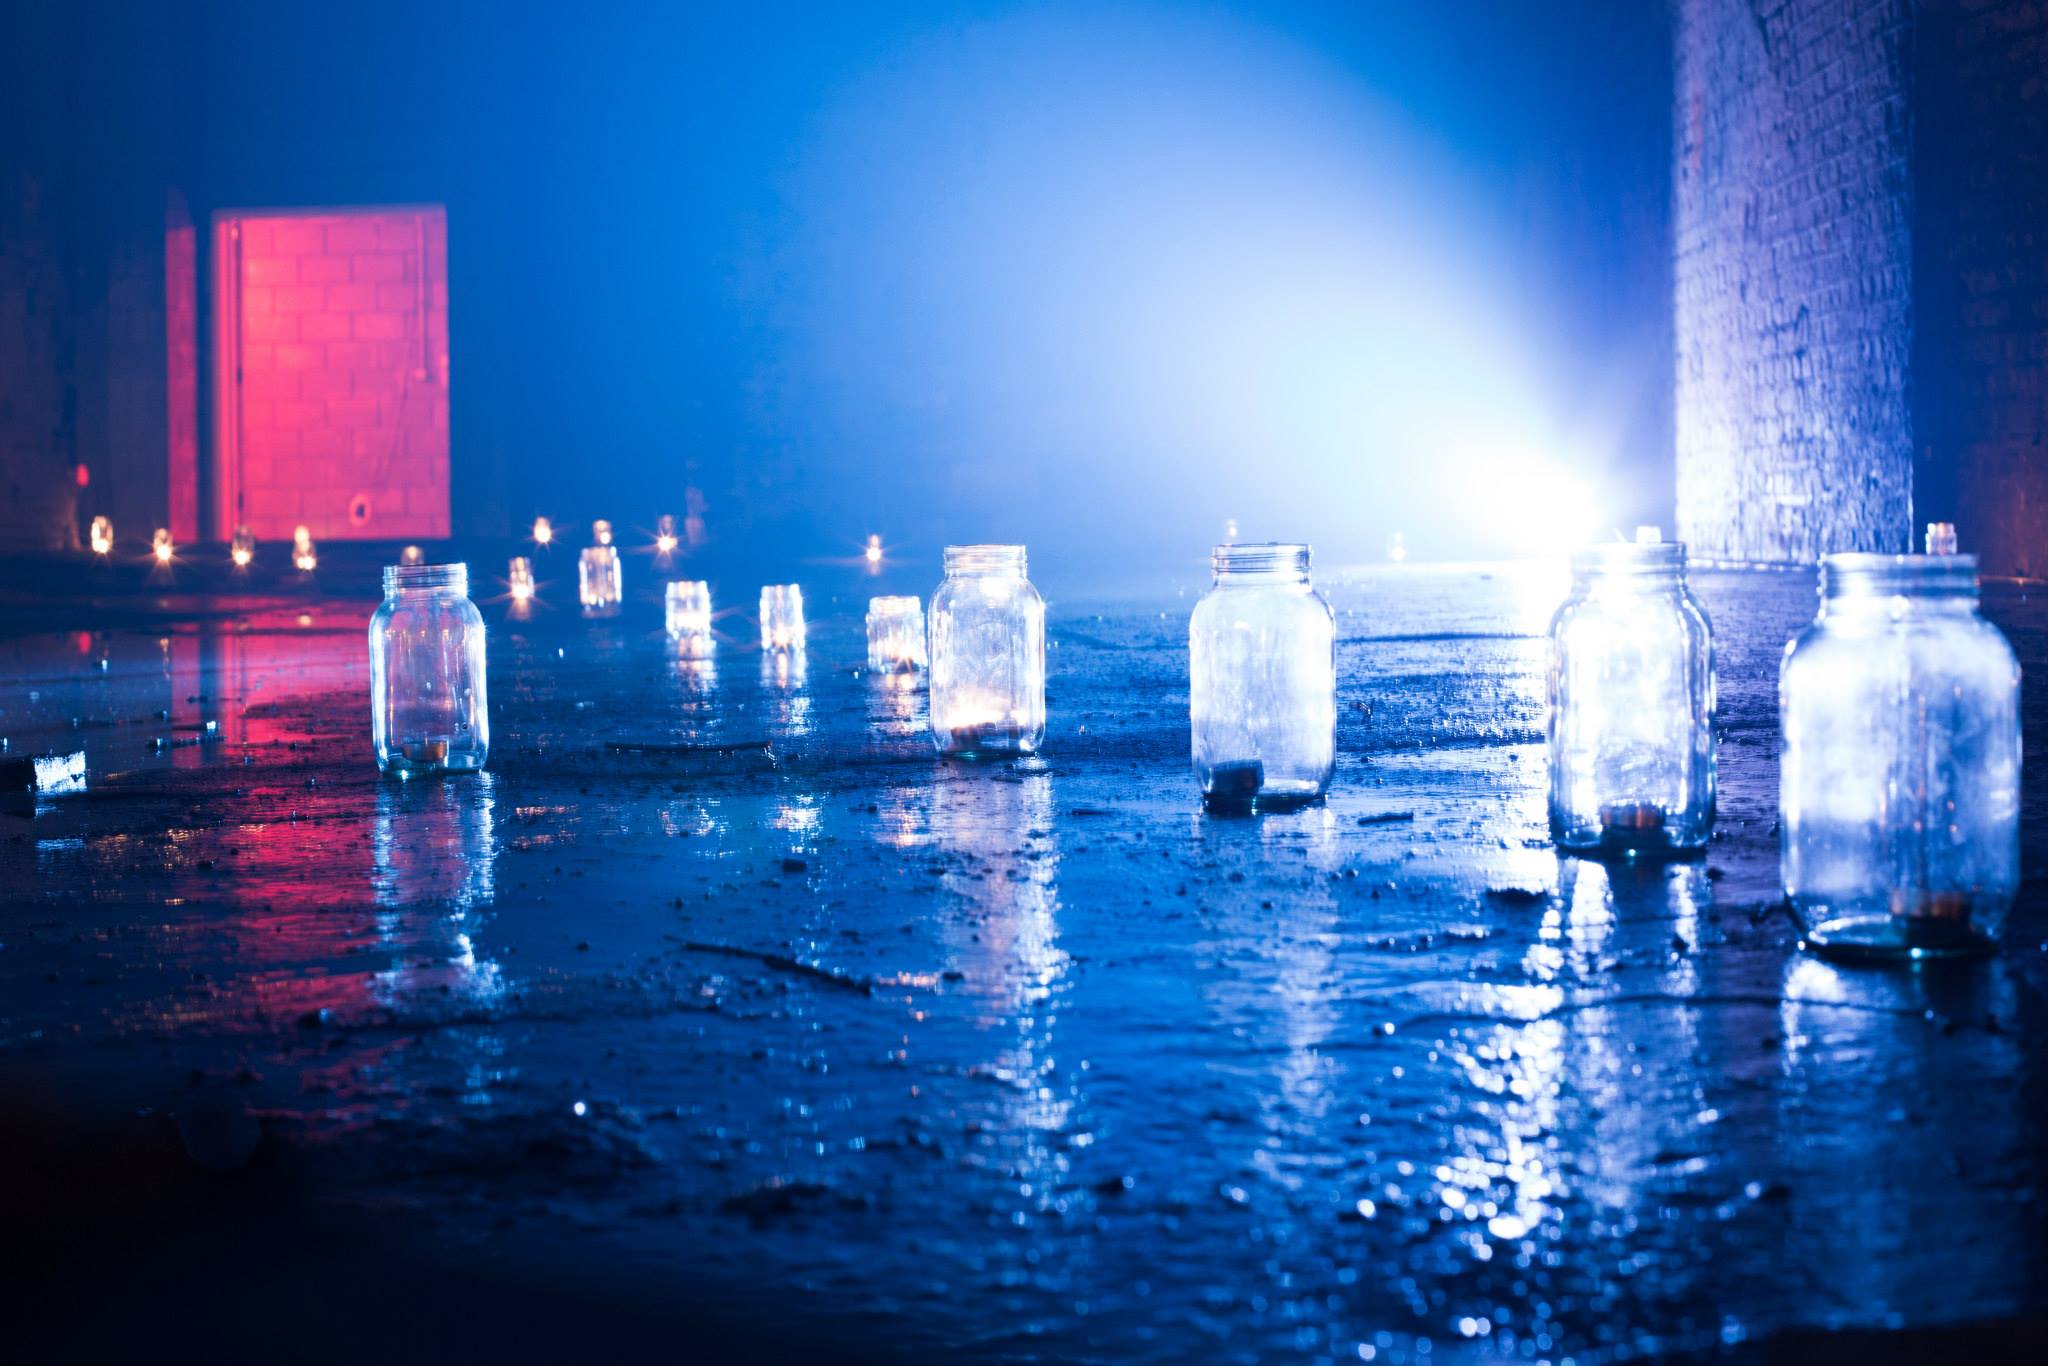 'He had set out candles as he had done the night before, and they glowed in jam jars around the floor...'